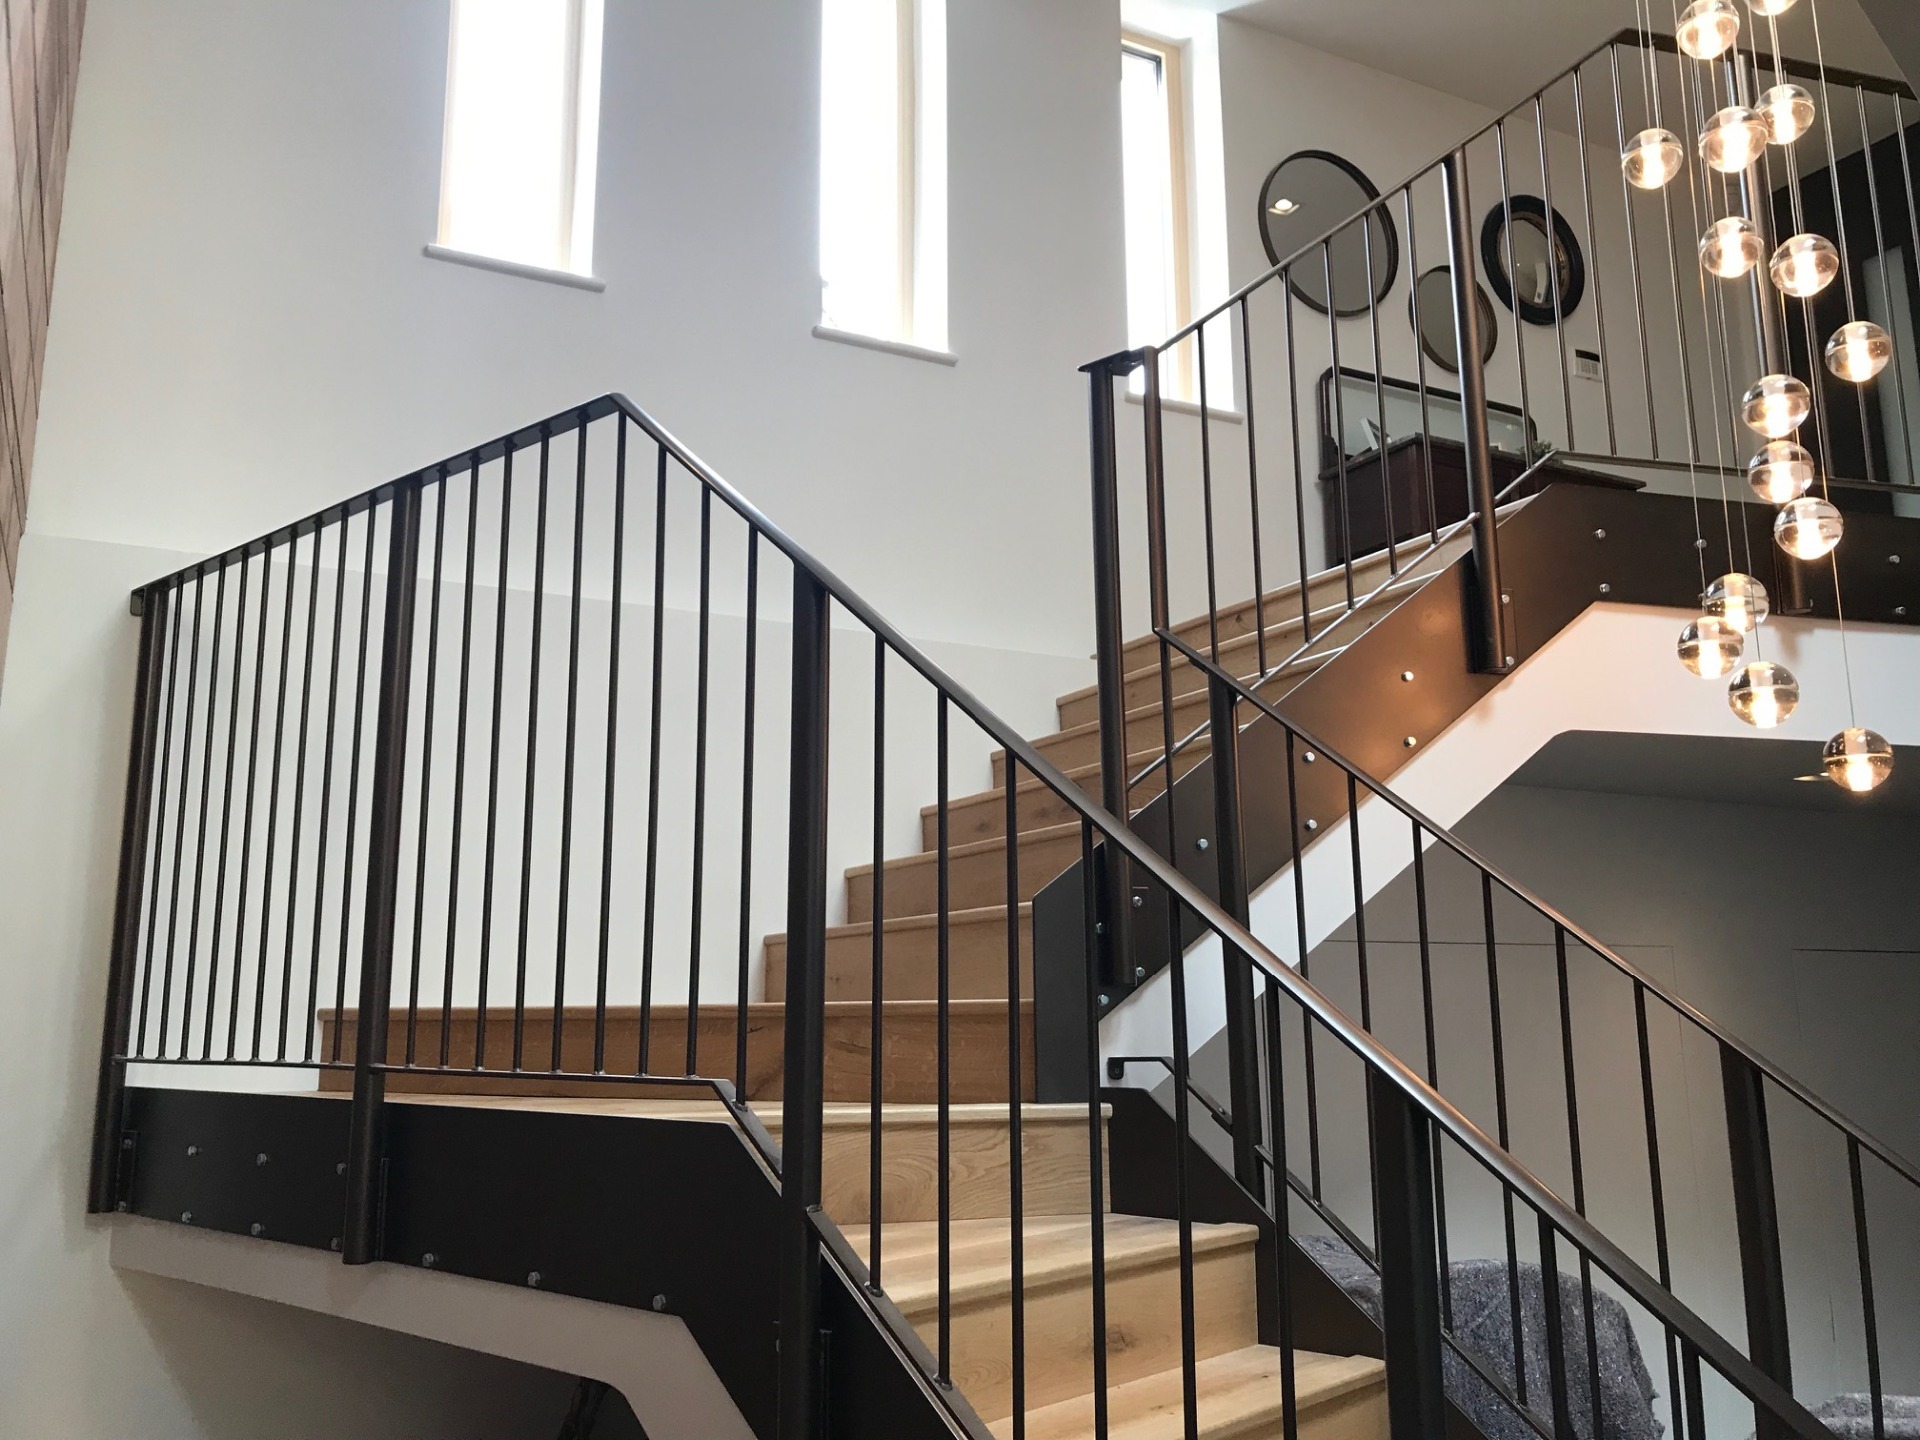 Mild Steel Vertical Bar Stair Balustrade with a Convex Handrail